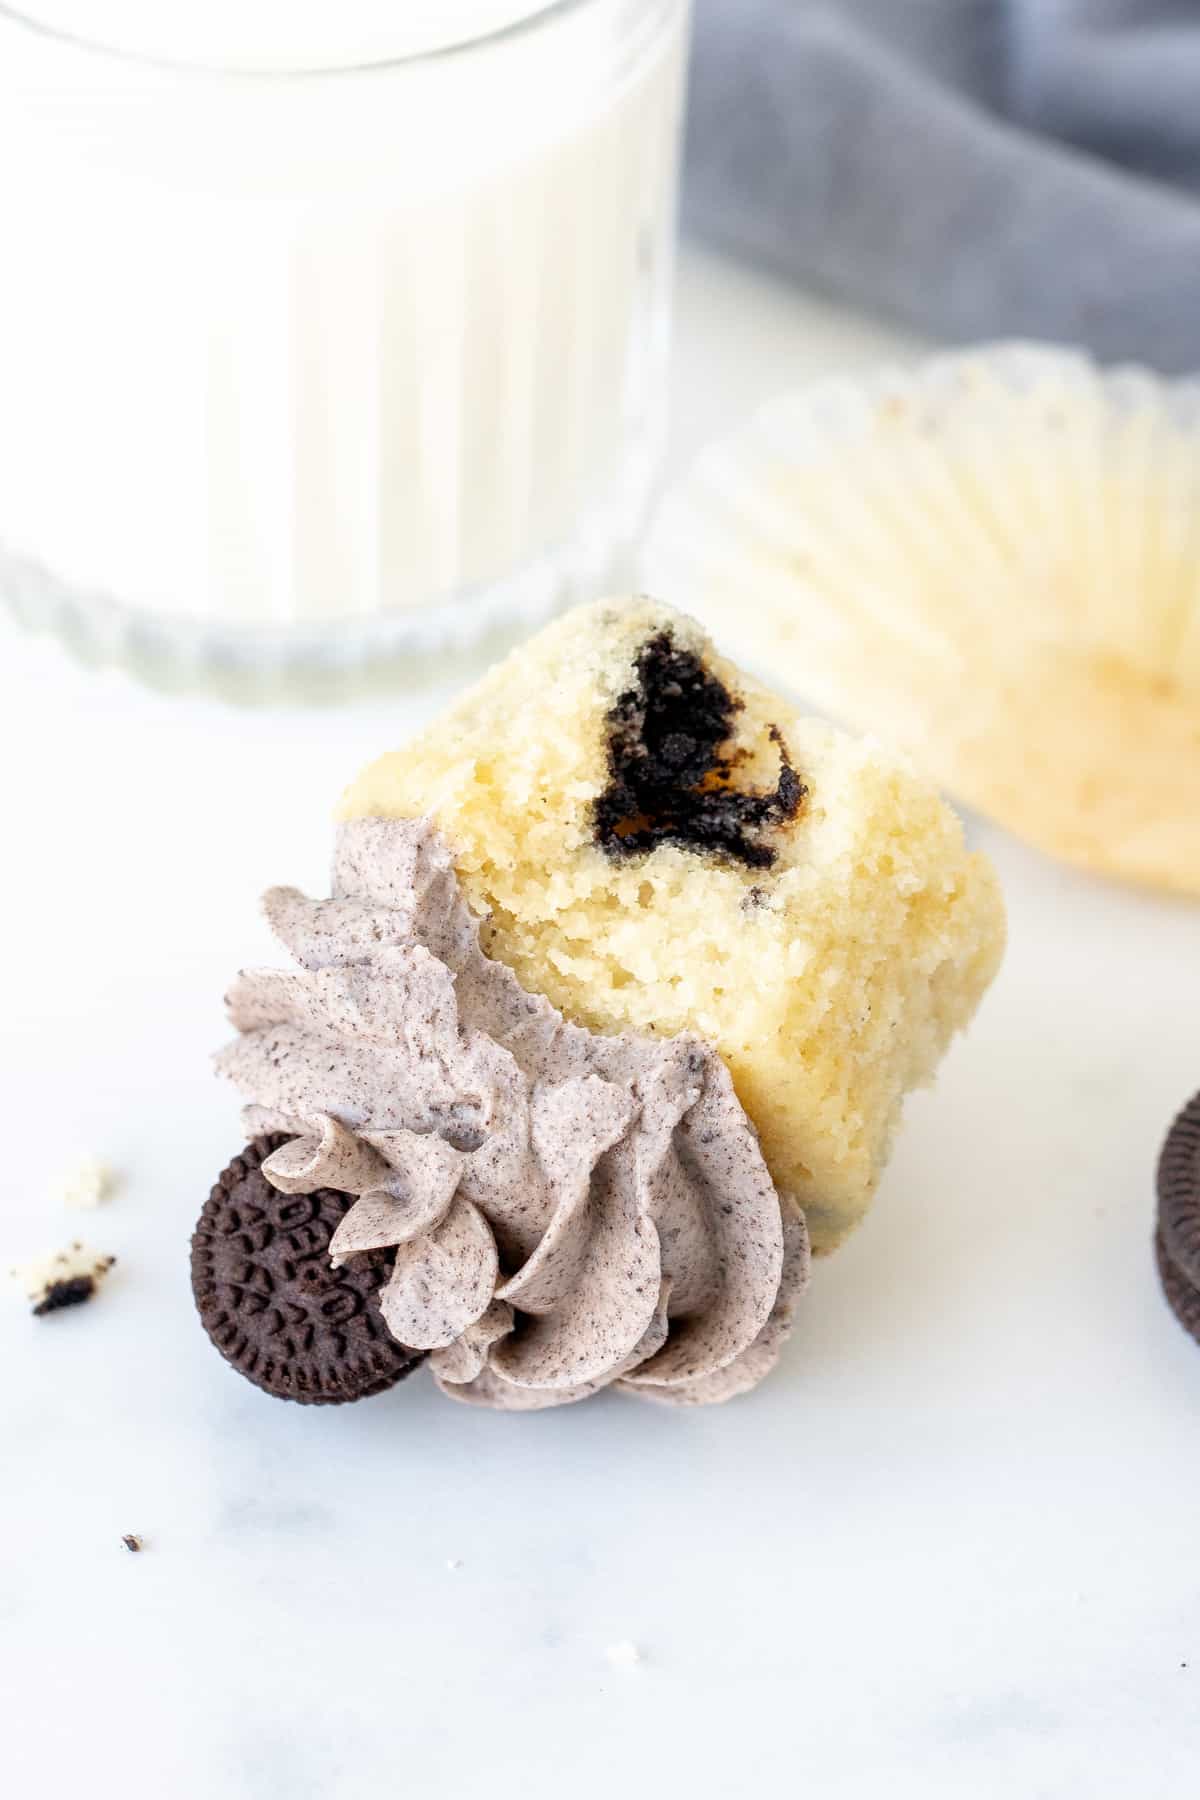 Oreo cupcake with a bite taken out, on its side with glass of milk